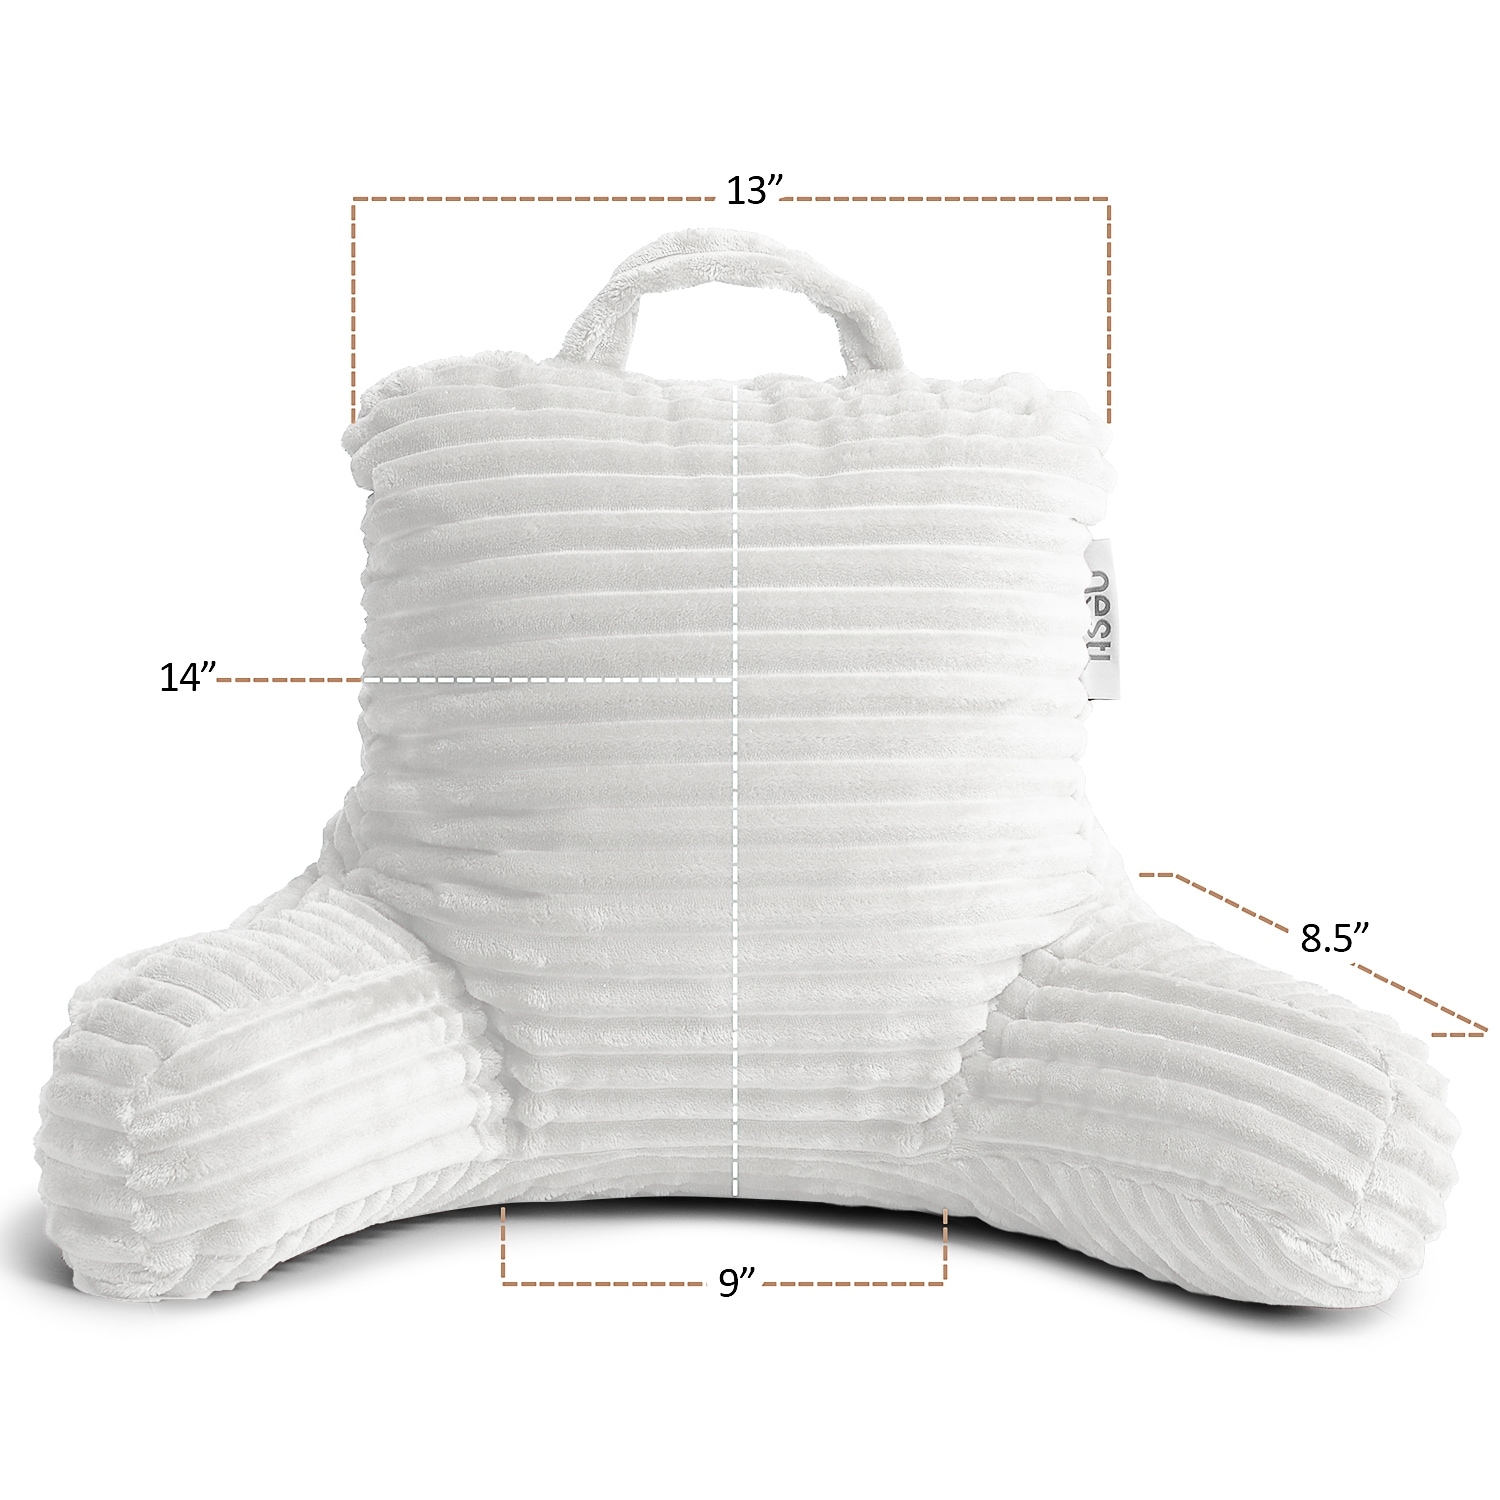 https://ak1.ostkcdn.com/images/products/is/images/direct/2e99ddd748d221f7e391d555eba902fdb0ae50d7/Nestl-Cut-Plush-Striped-Reading-Pillow---Back-Support-Shredded-Memory-Foam-Bed-Rest-Pillow-with-Arms.jpg